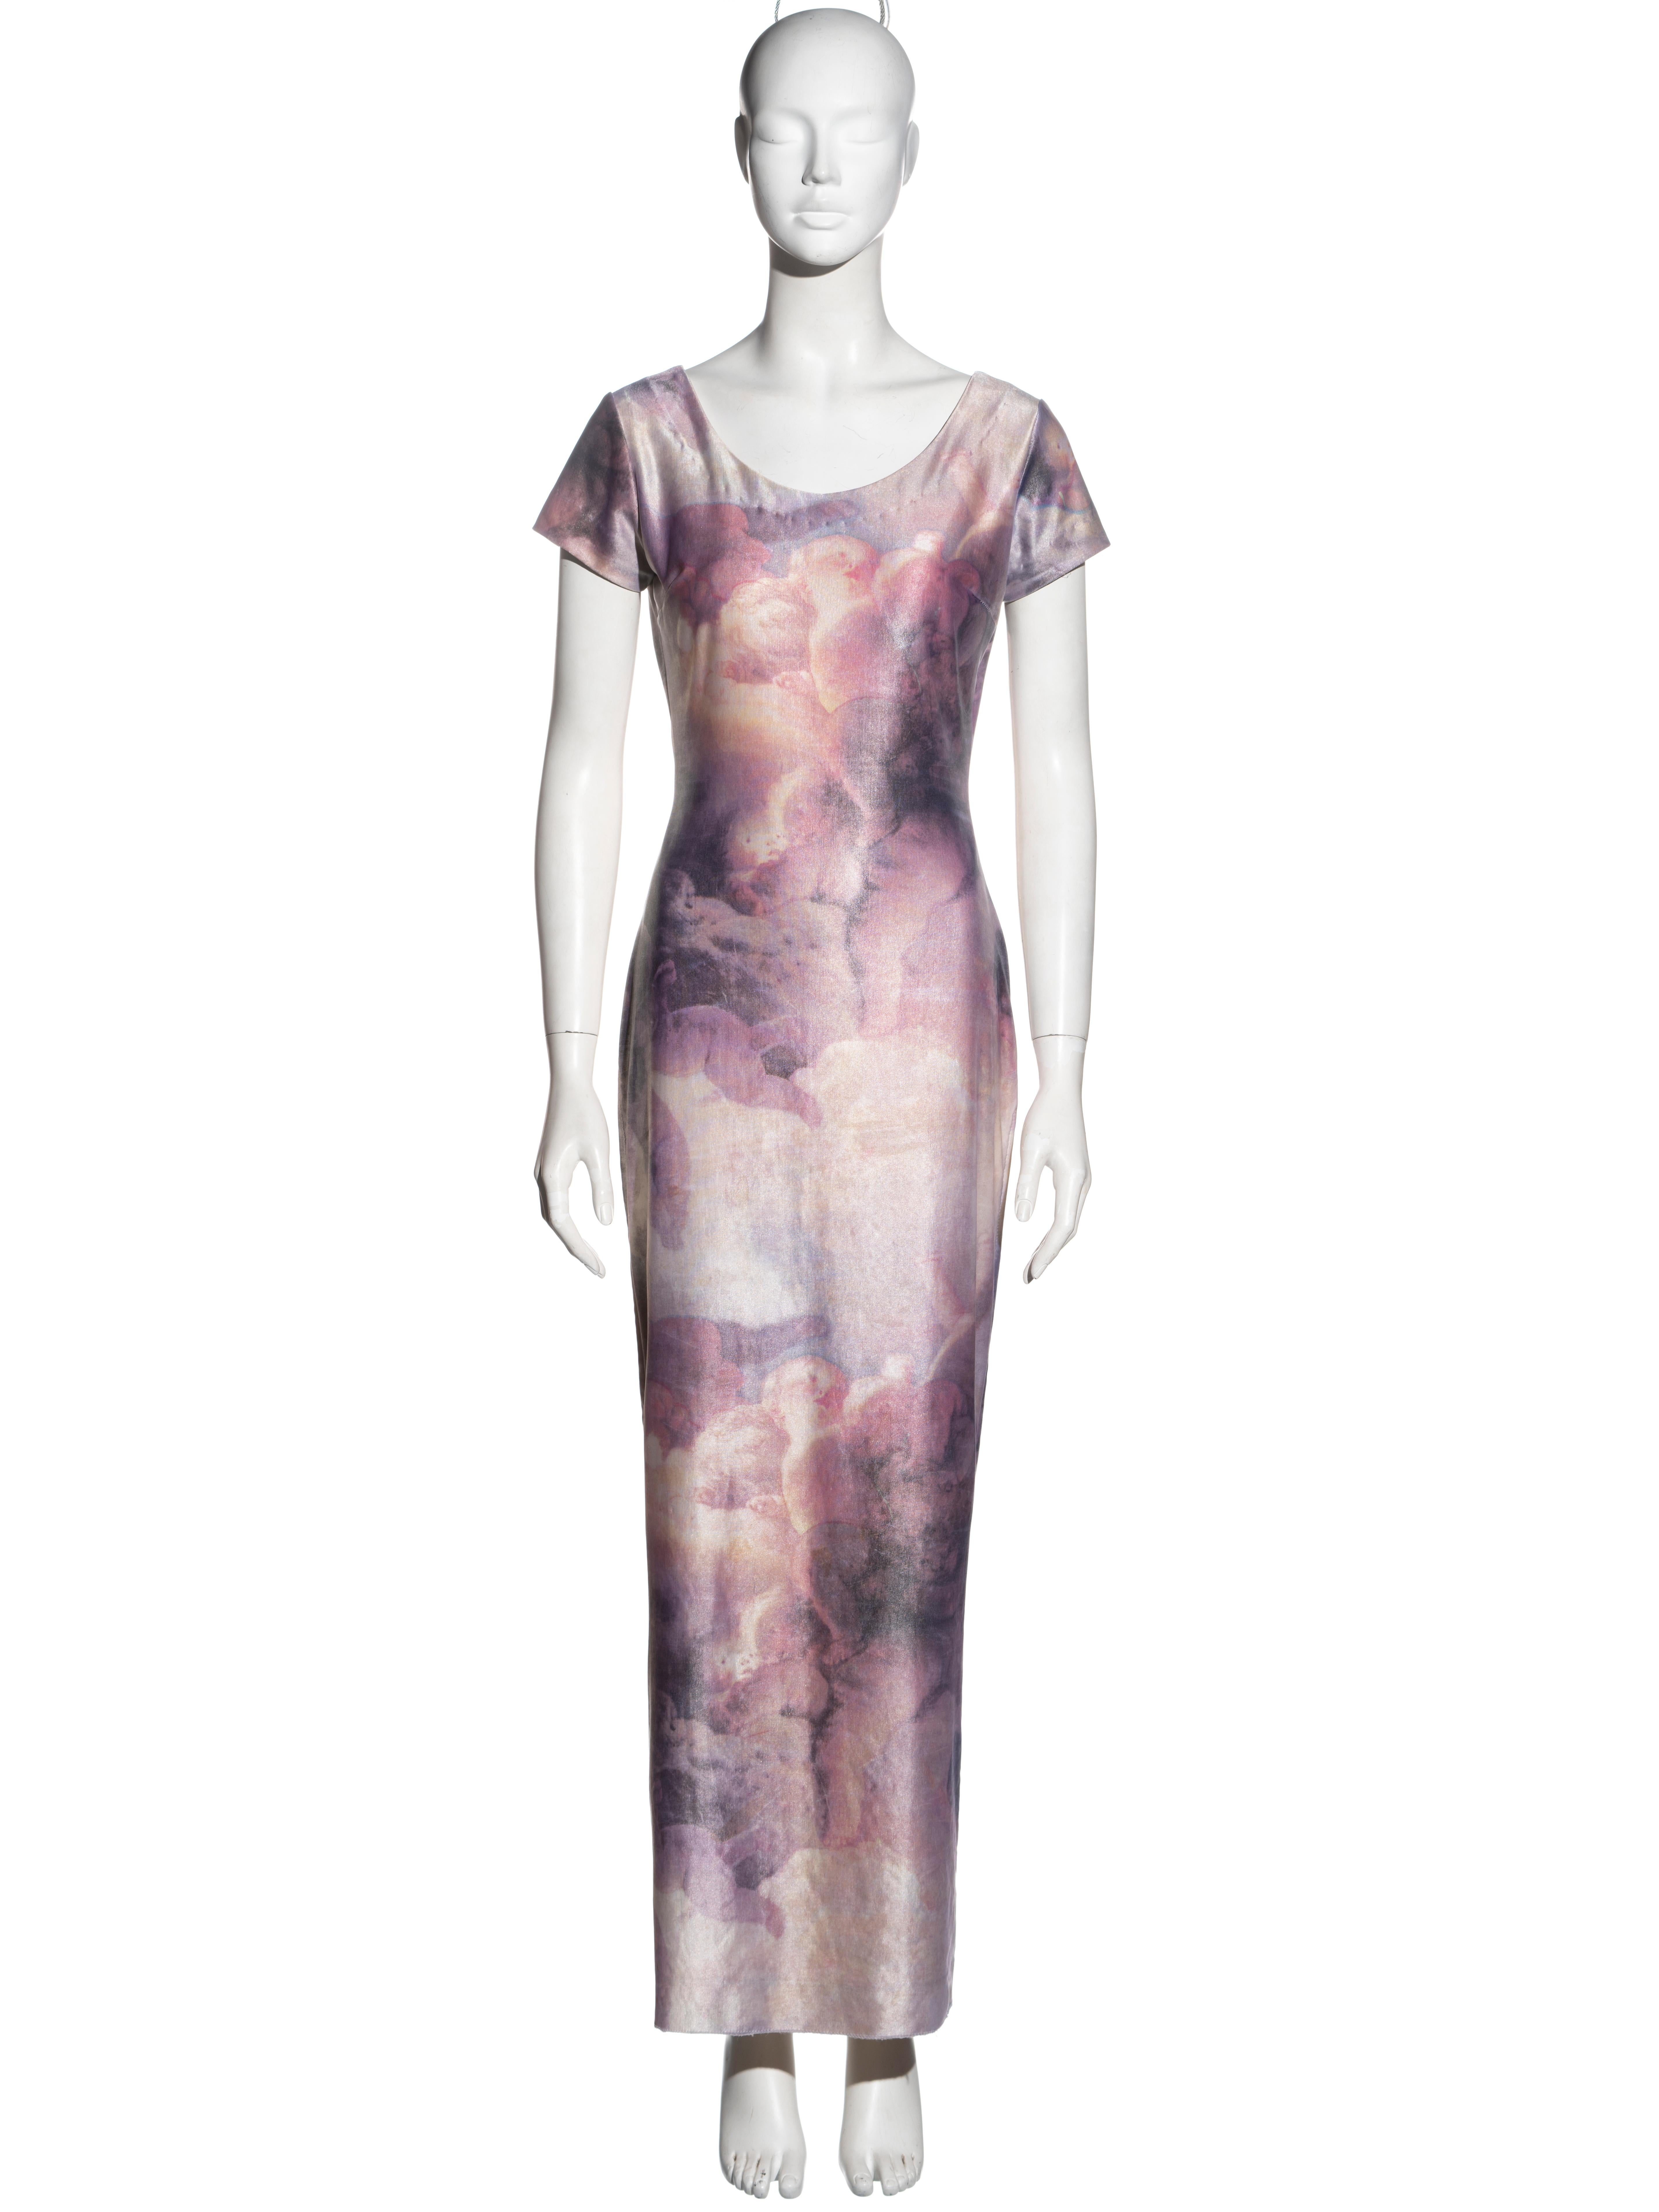 ▪ Rare Vivienne Westwood evening maxi dress 
▪ Lycra printed with a detail from Jean-Honore Fragonard's 